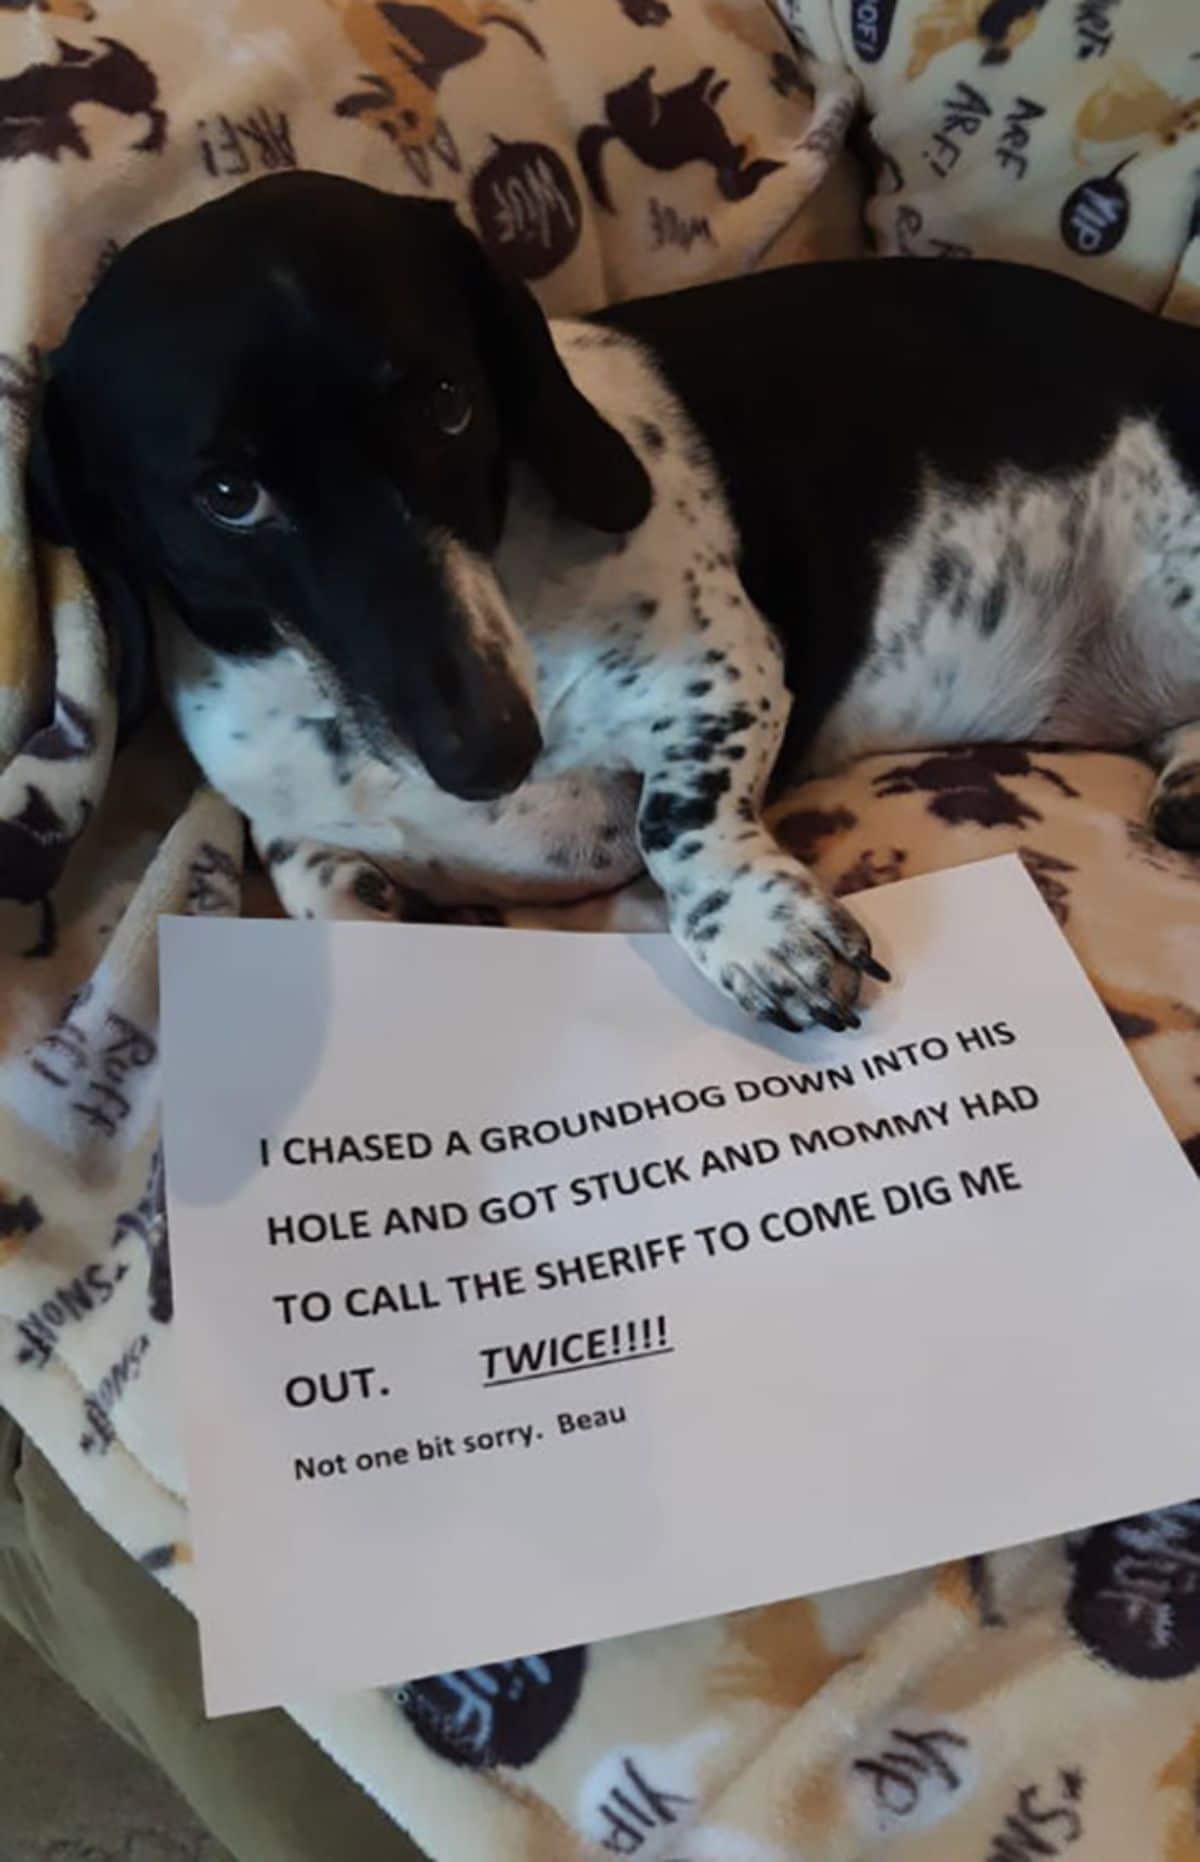 black and white dachshund laying on a black and white blanket with a note saying the dog chased a groundhog into a hole and got stuck and the sheriff had to rescue the dog